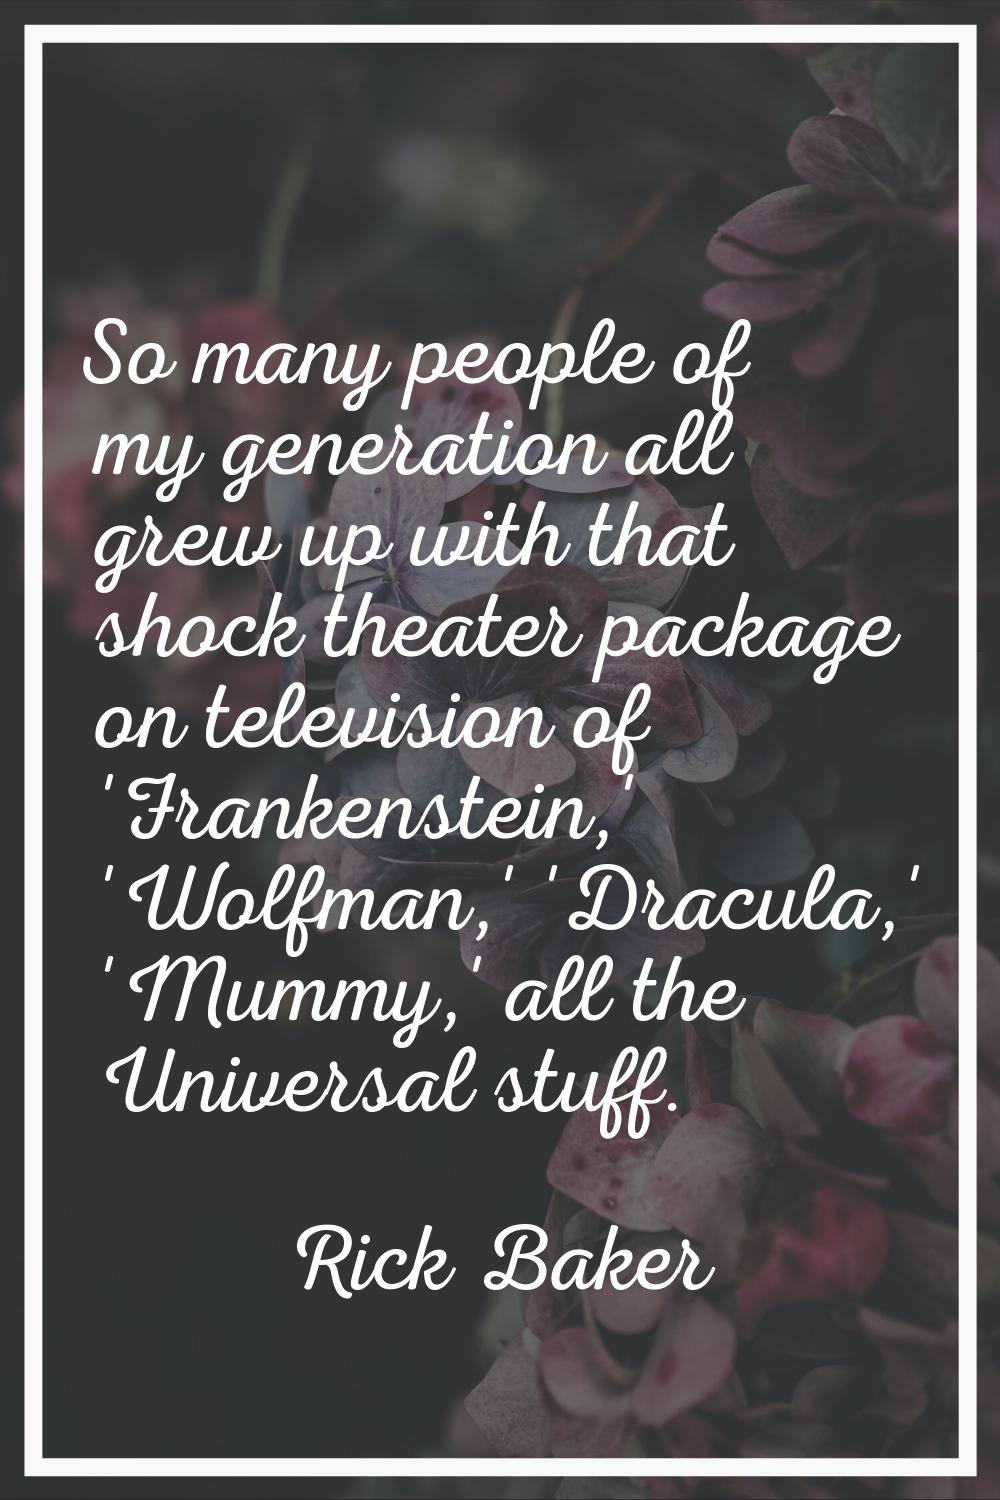 So many people of my generation all grew up with that shock theater package on television of 'Frank